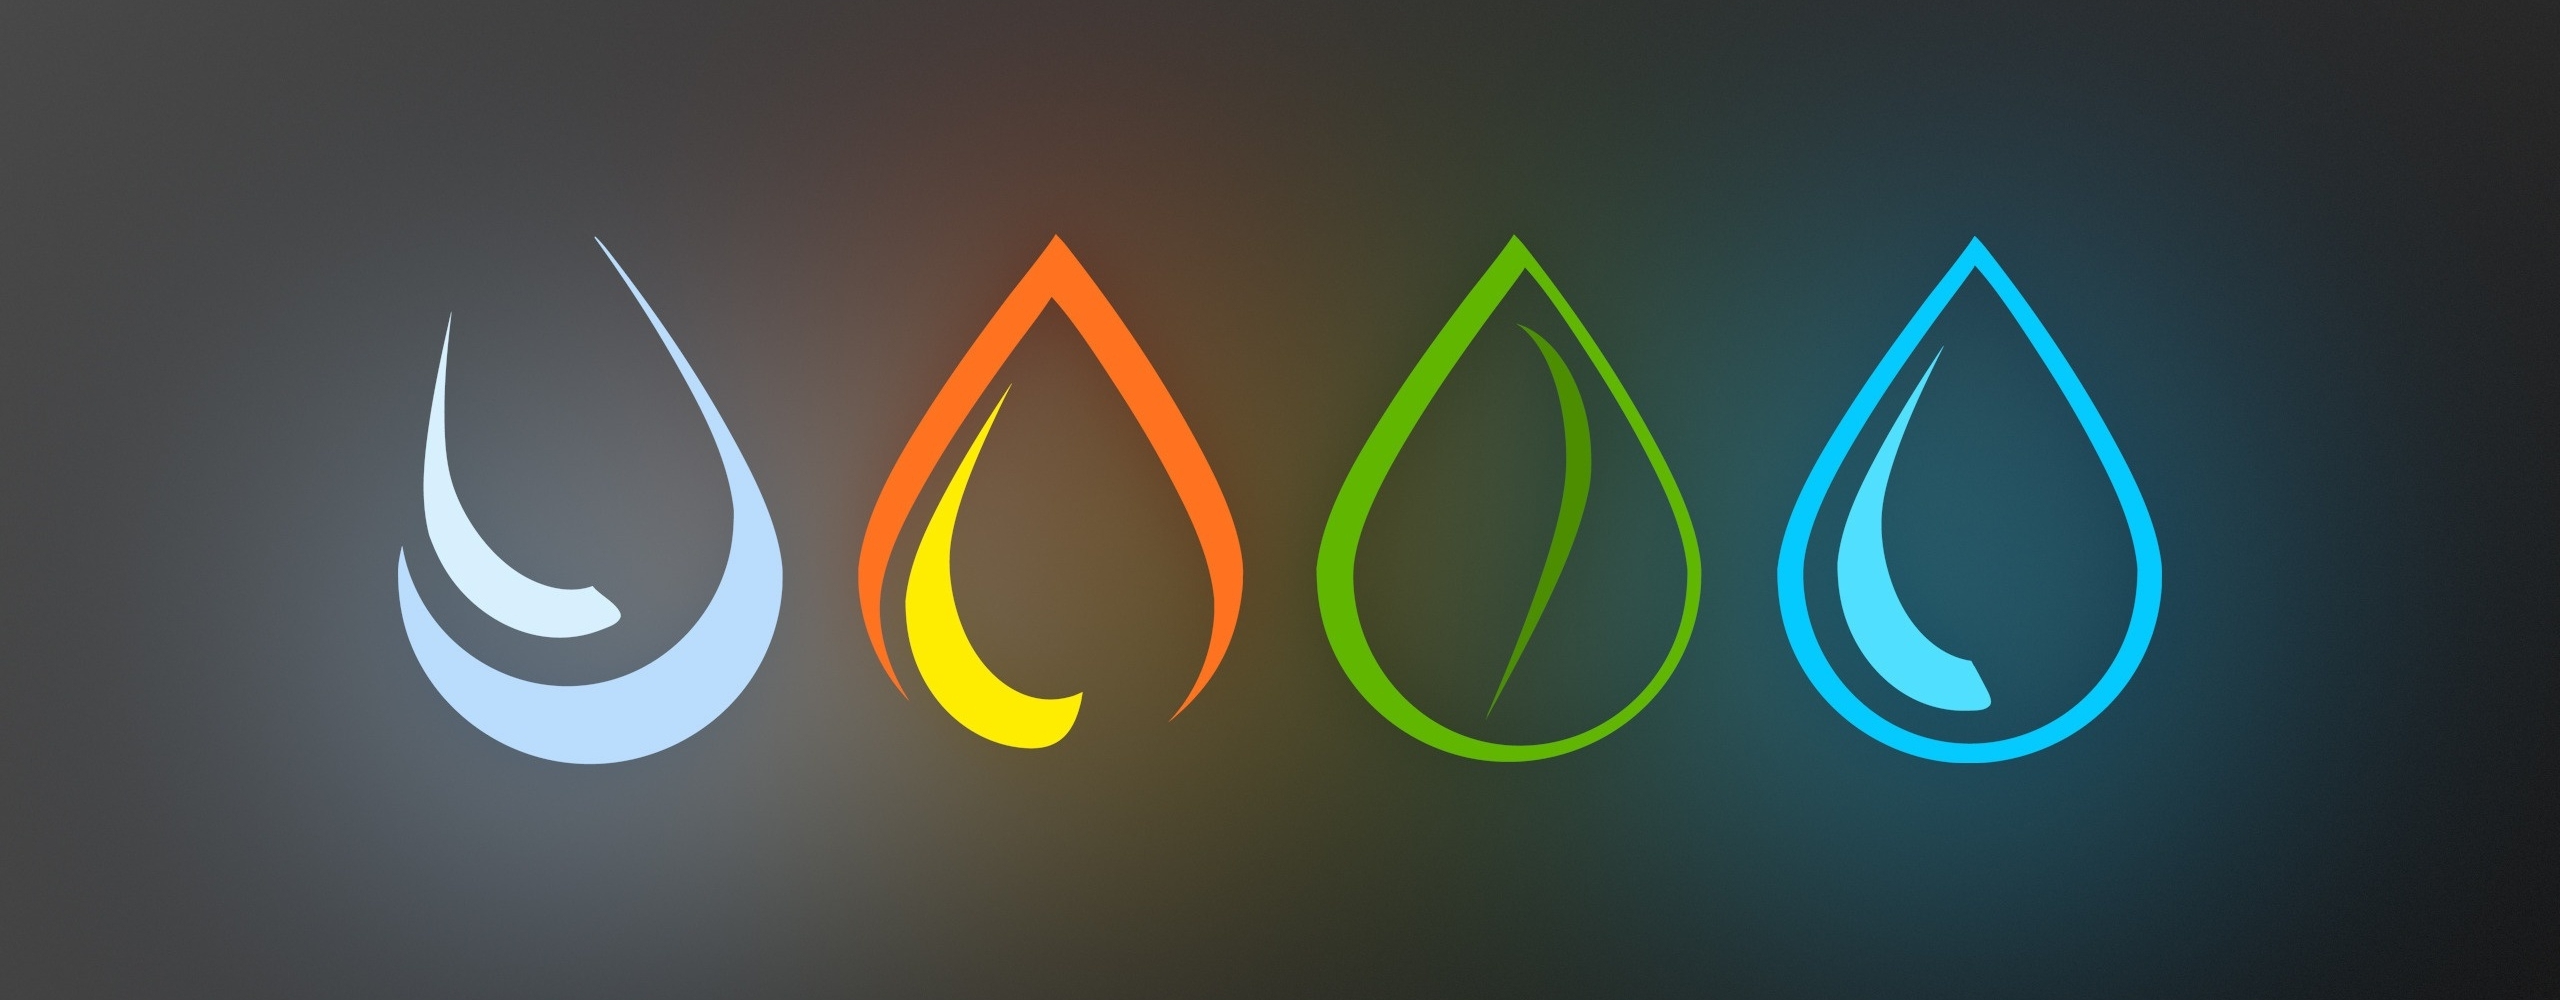 a stylistic image depicting the four classical Western elements:  earth, air, fire, and water